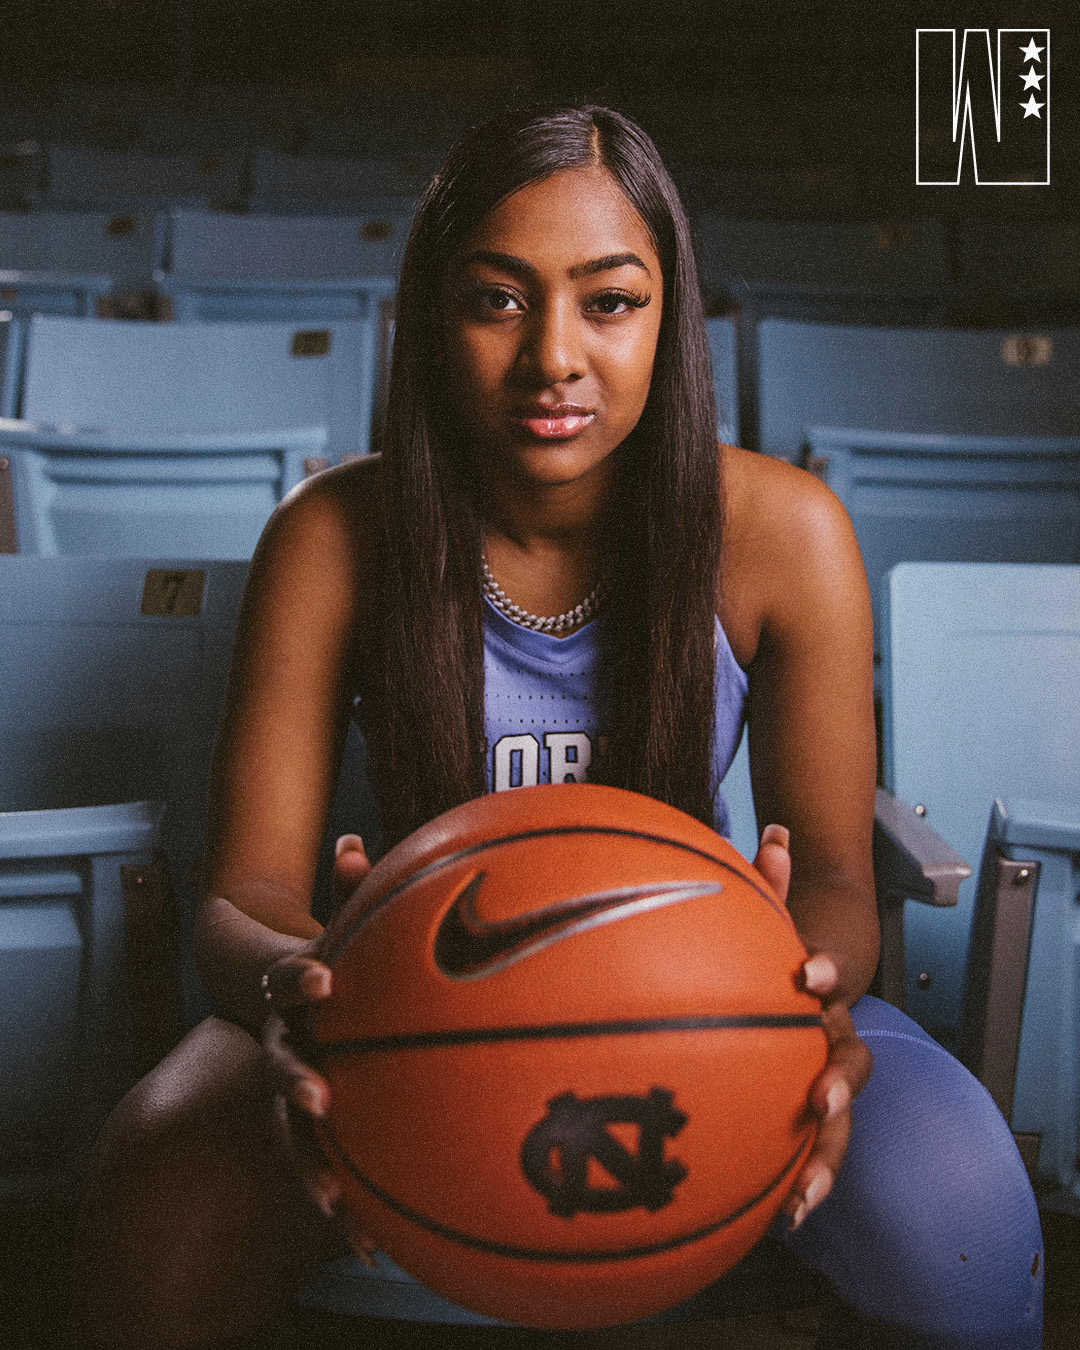 From a Sweet 16 Run to NIL Deals, UNC’s Deja Kelly is Already a Star in the Making